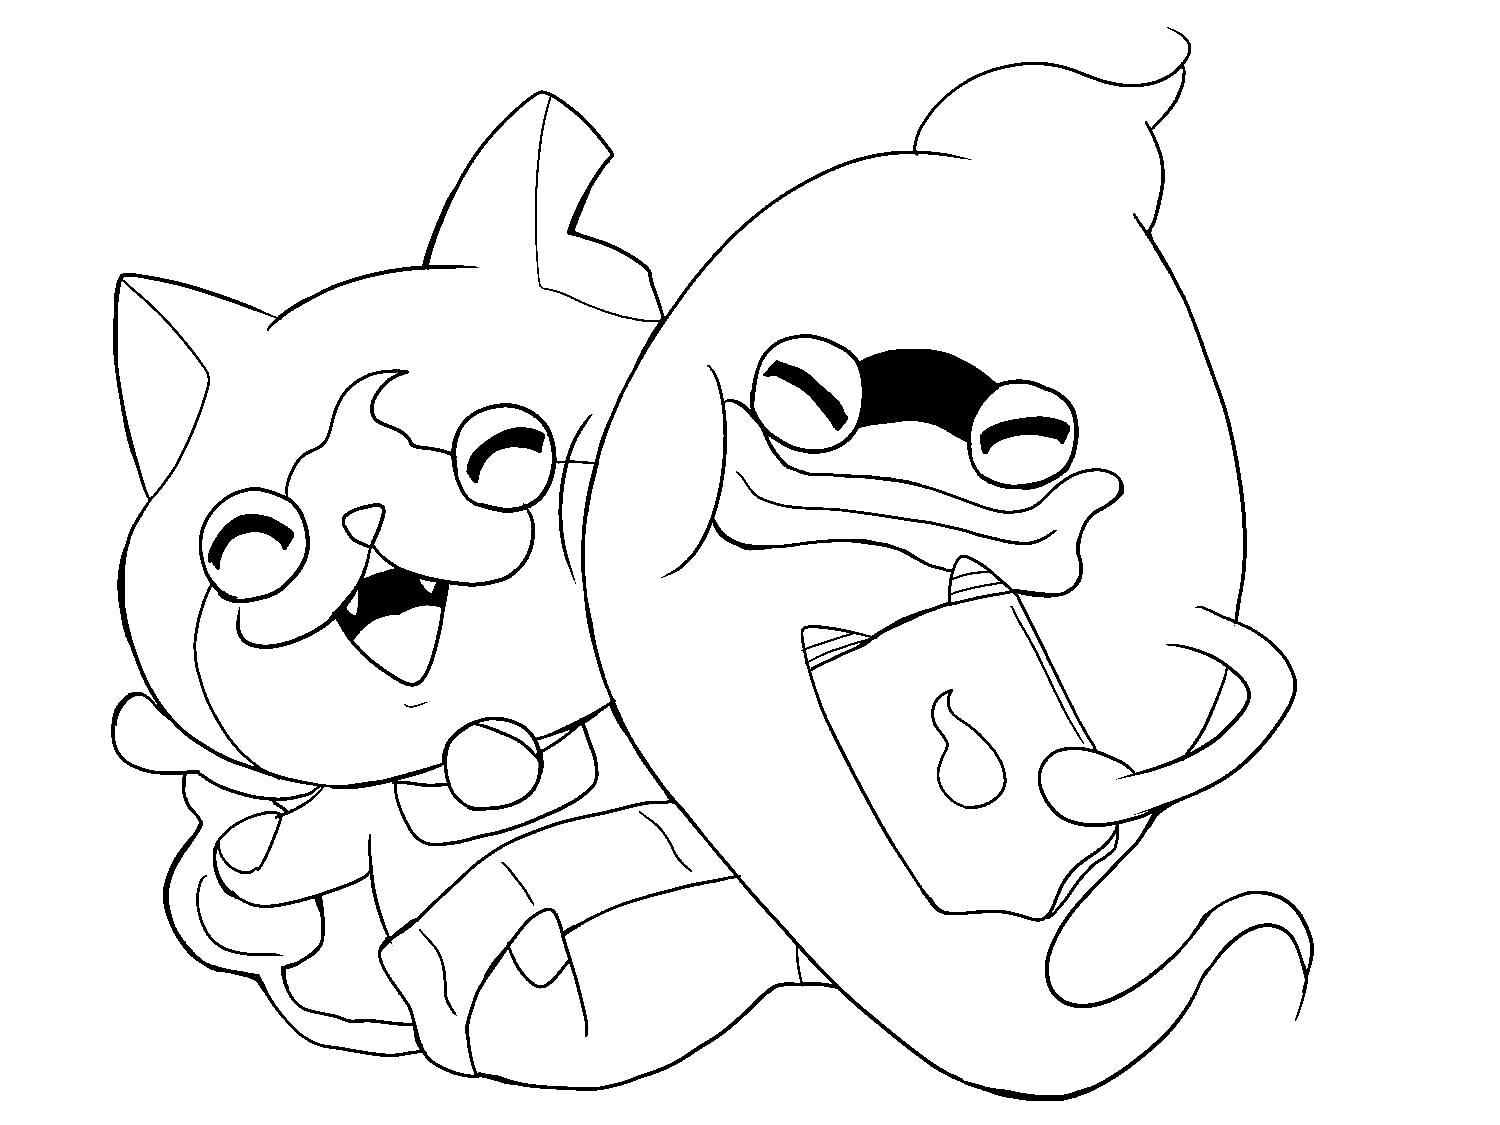 Jibanyan with Whisper Coloring Page